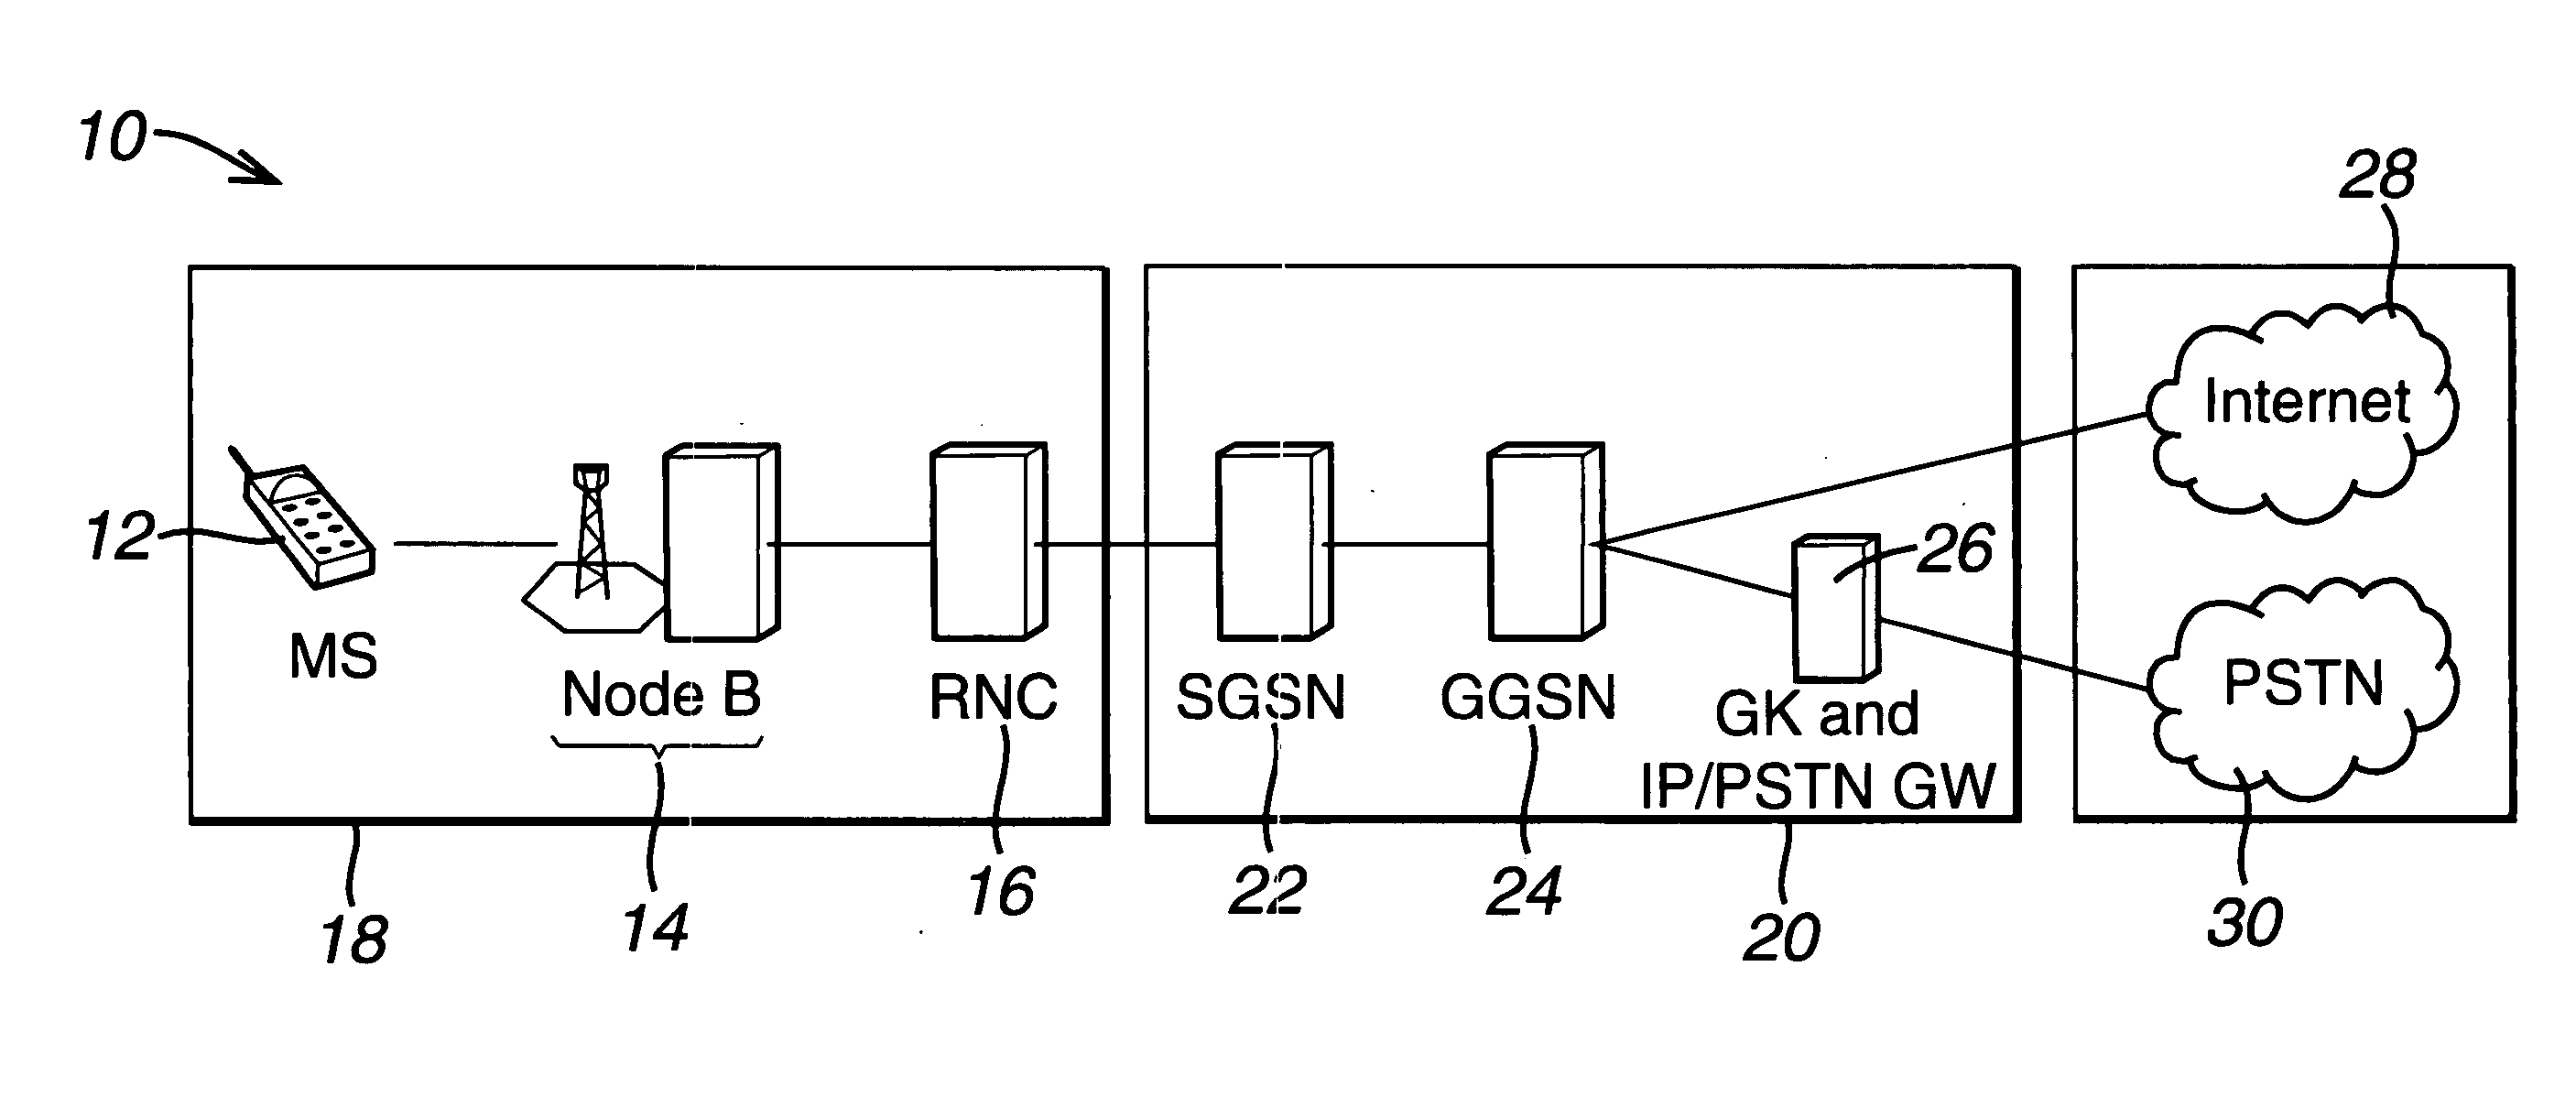 Method and apparatus for telecommunications using internet protocol